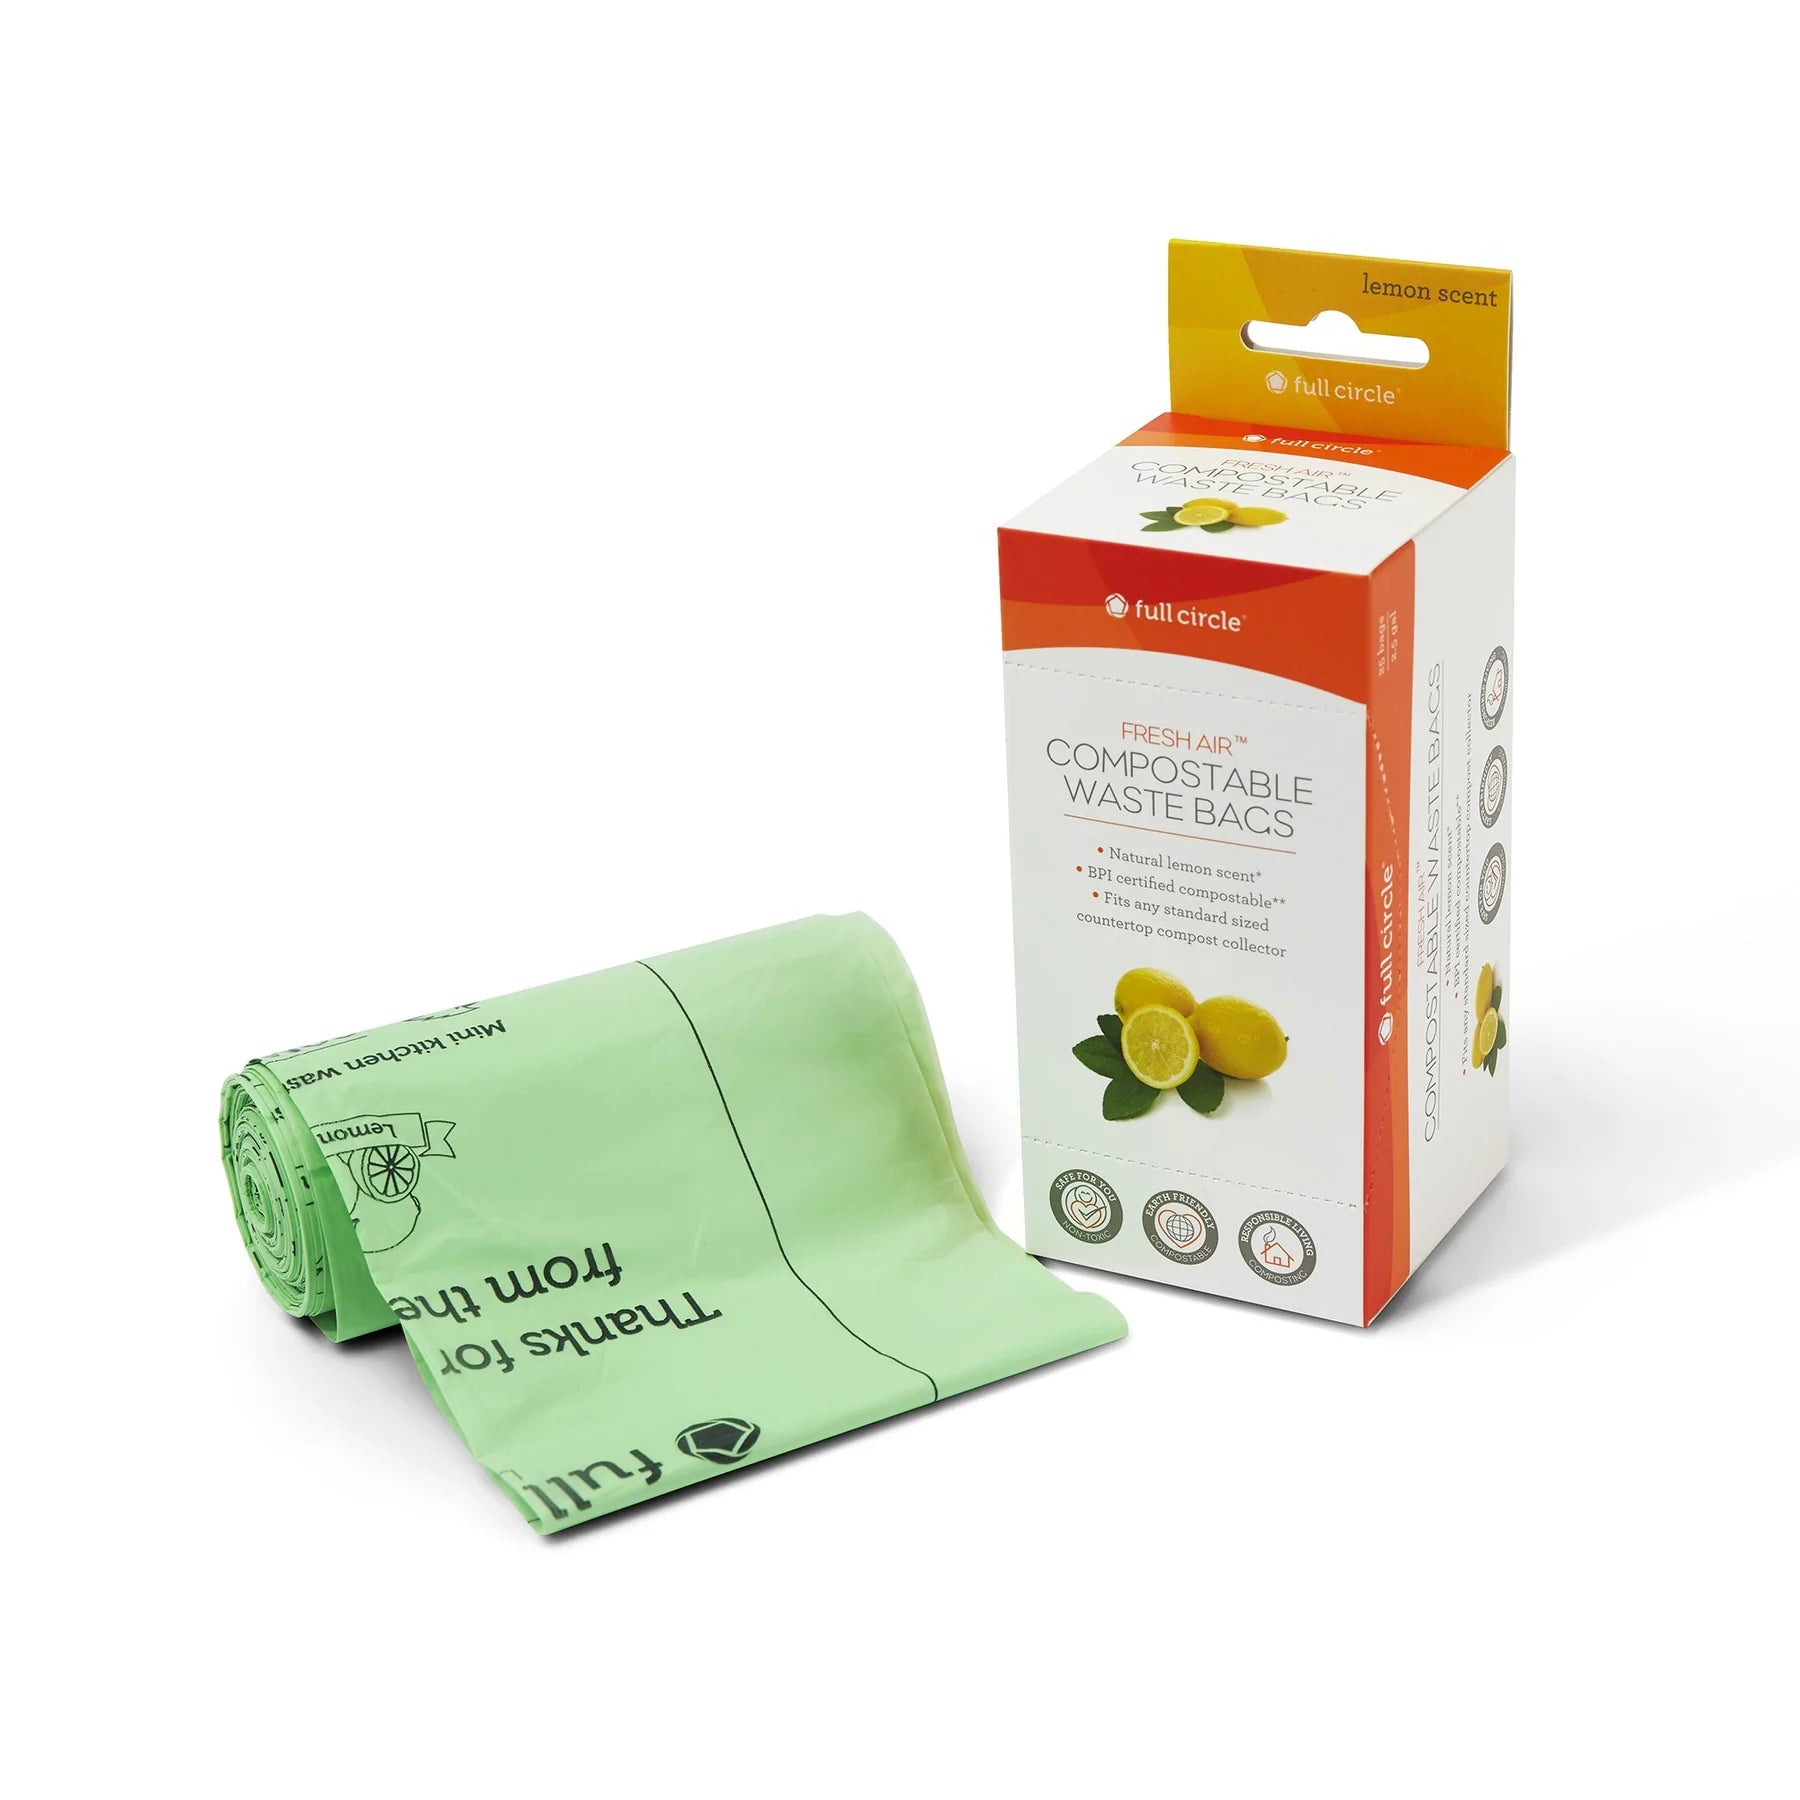 Fresh Air Compostable Waste Bags Lemon Scented